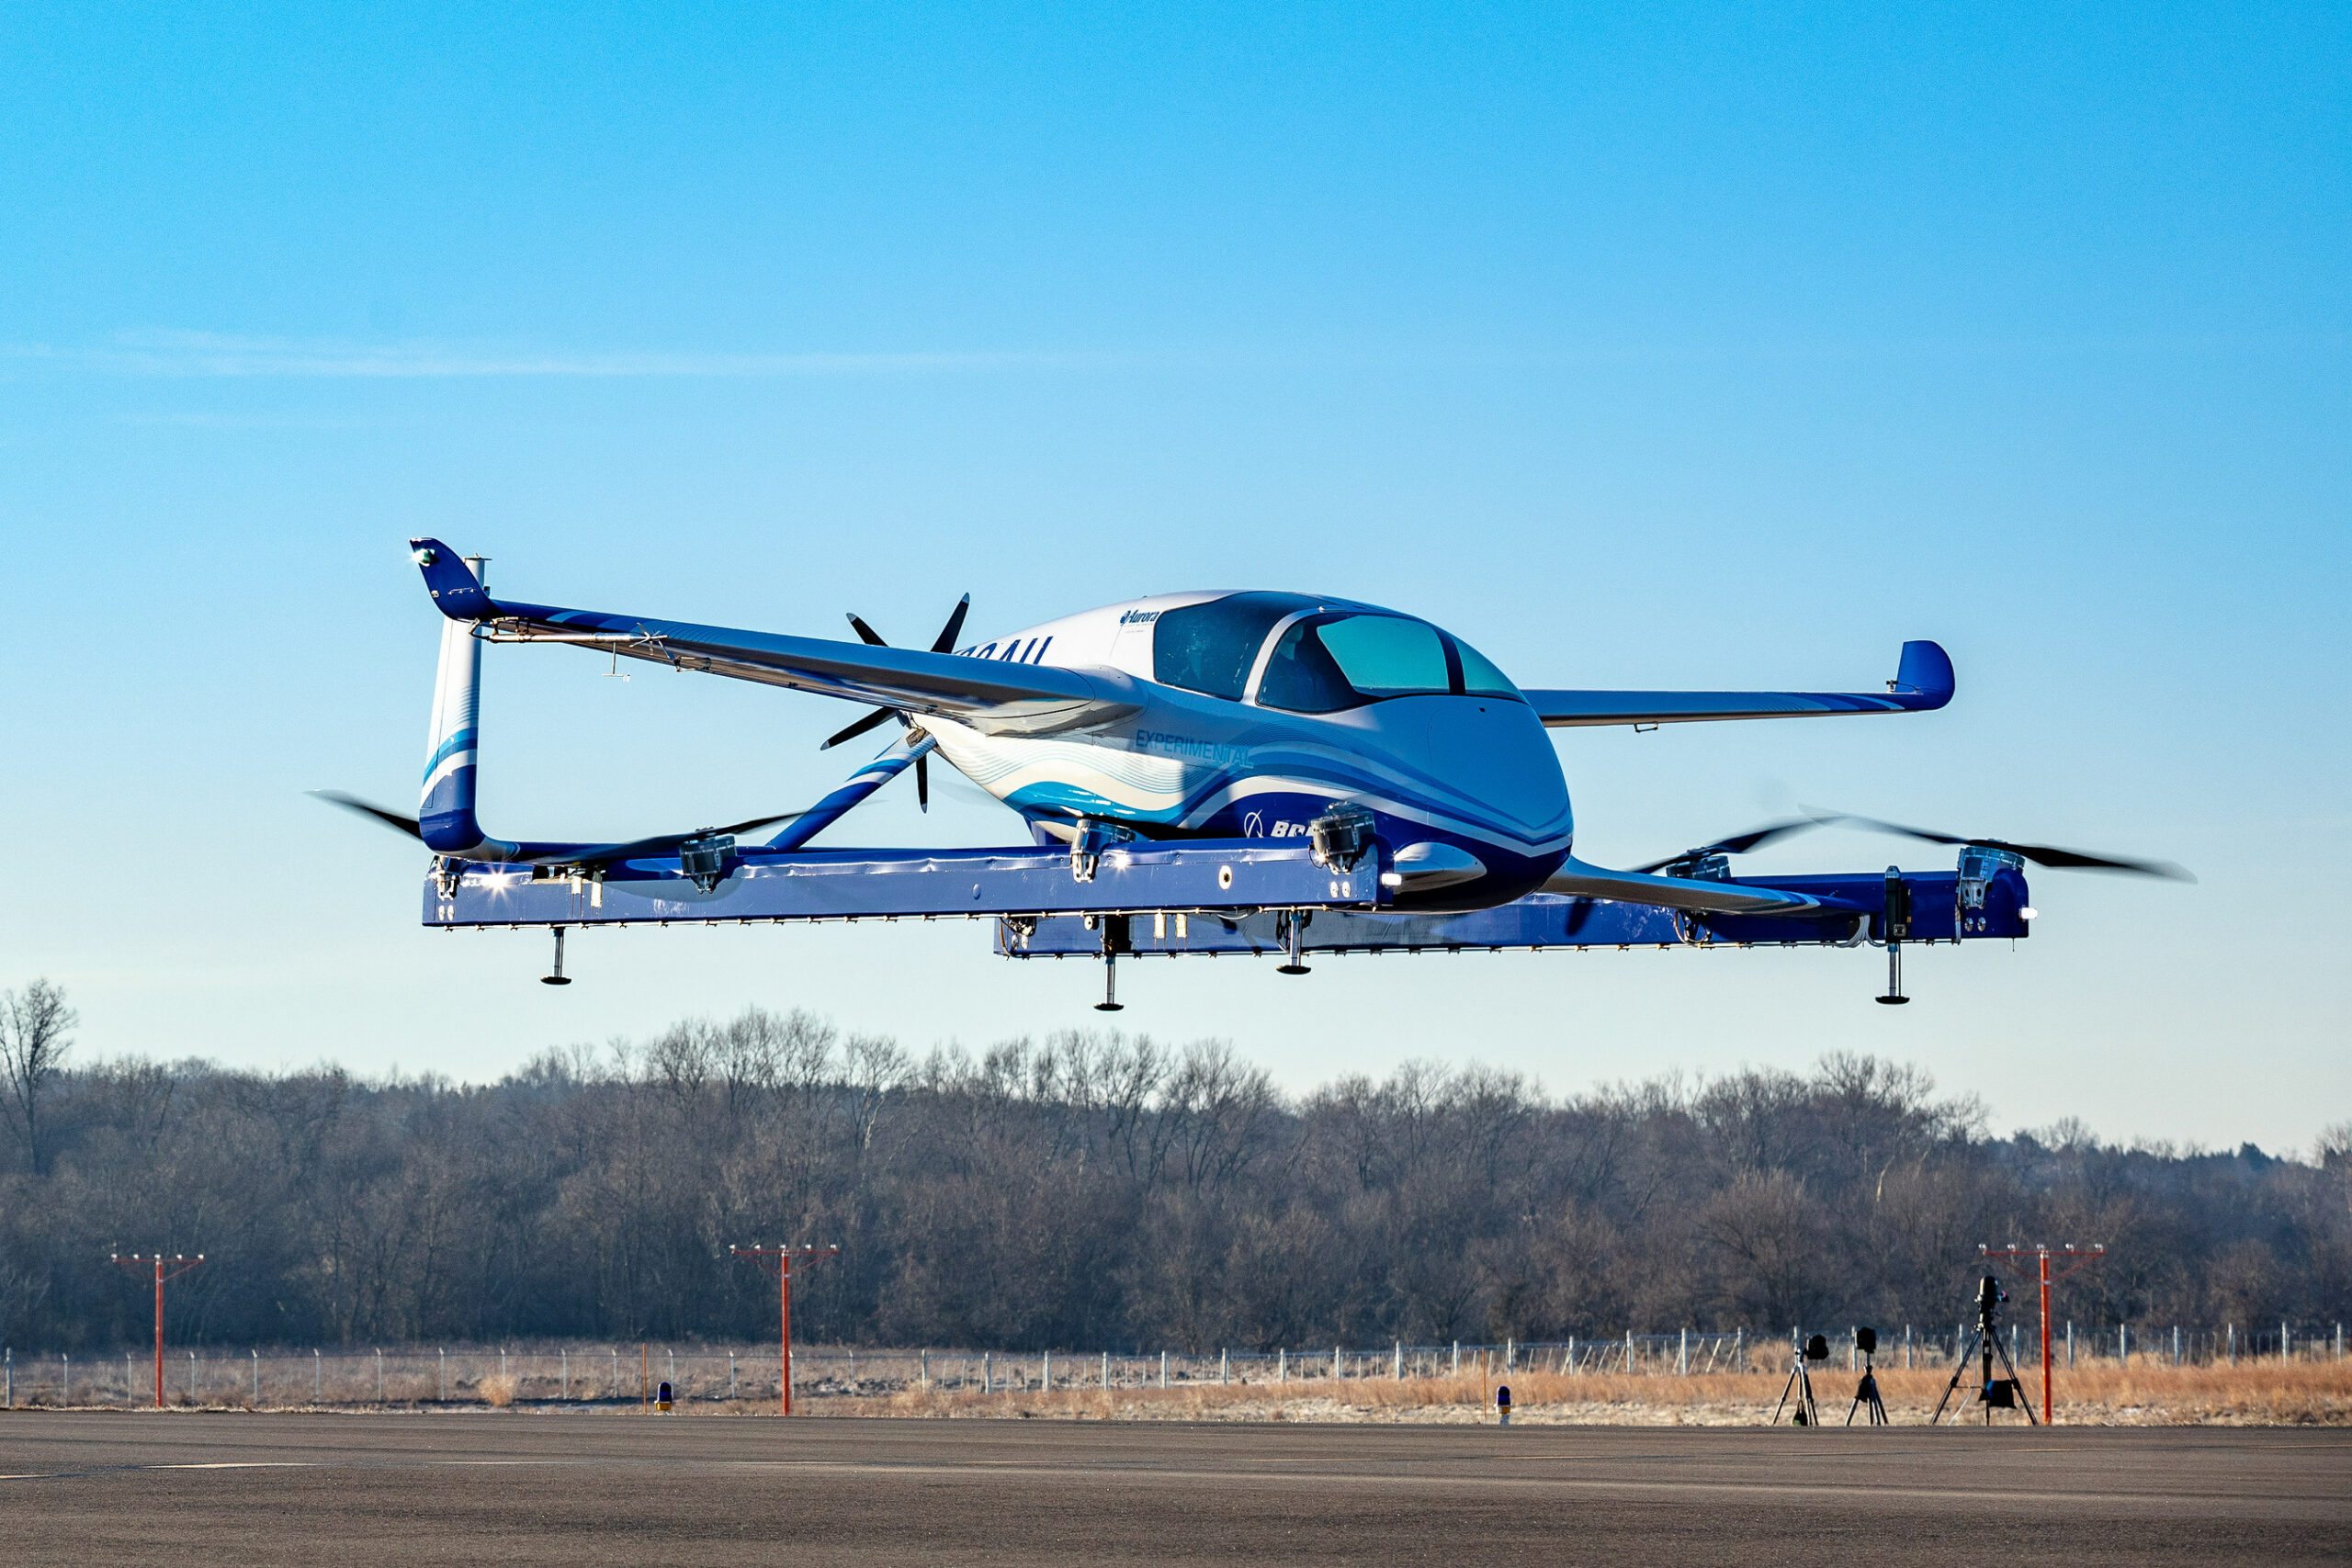 This new box full of sensors could help more flying machines get off the ground